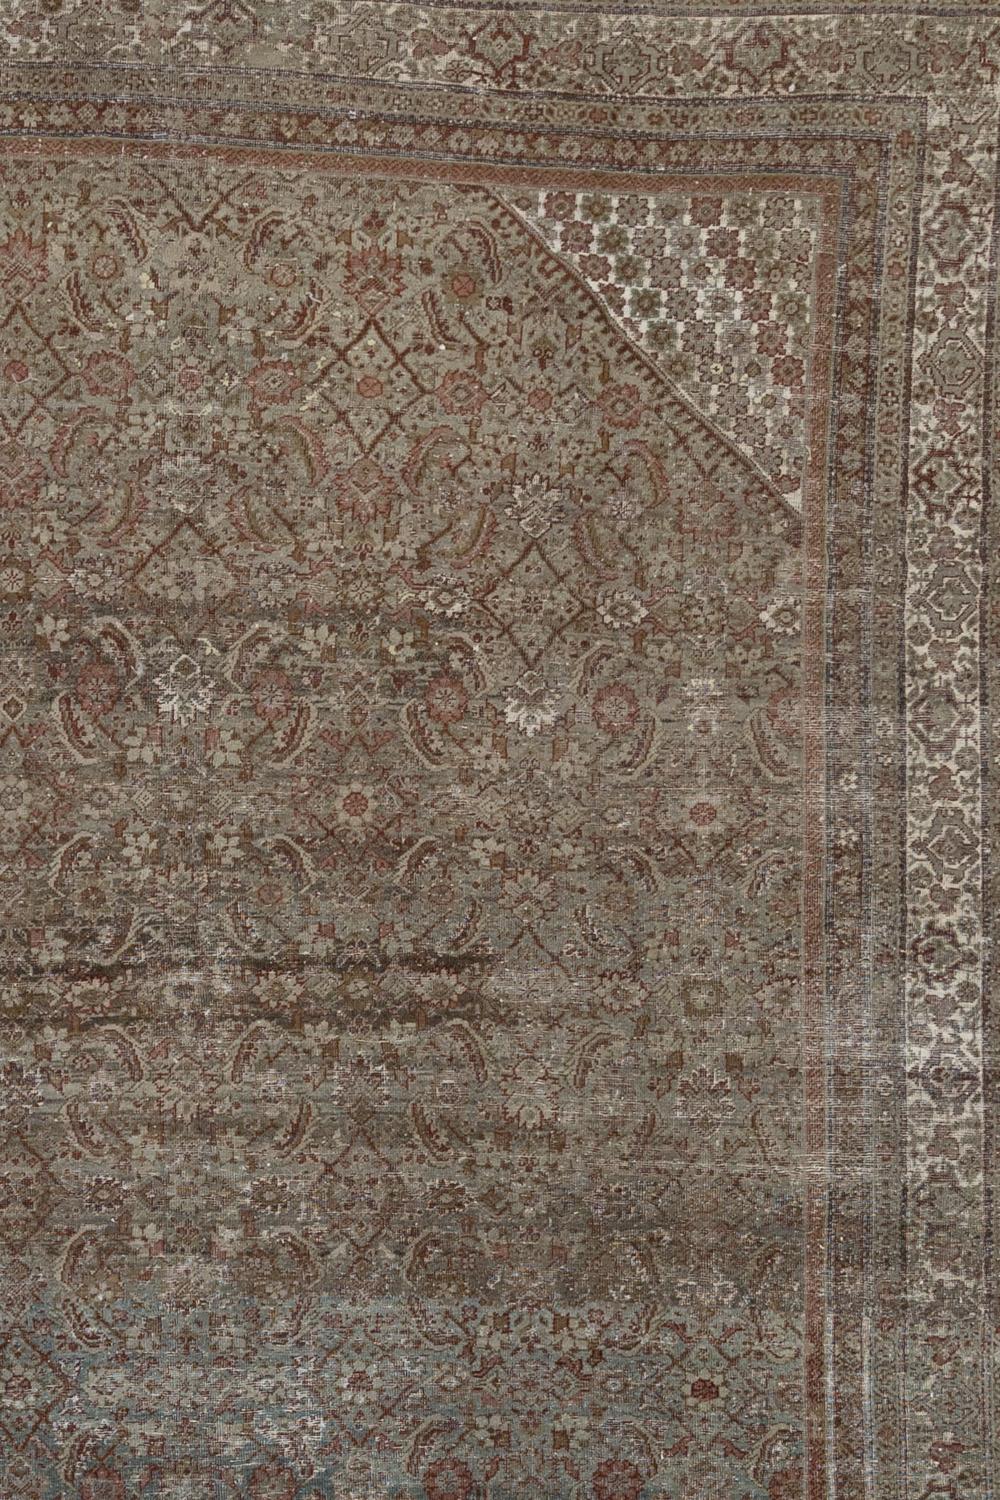 Age: Circa 1910

Colors: dusty pink, terracotta, olive, rust, oxblood

Pile: low-medium

Wear Notes: 3-4

Material: wool on cotton

Antique Persian Malayer with a warm earthy color palette. Very finely woven with an all over herati pattern